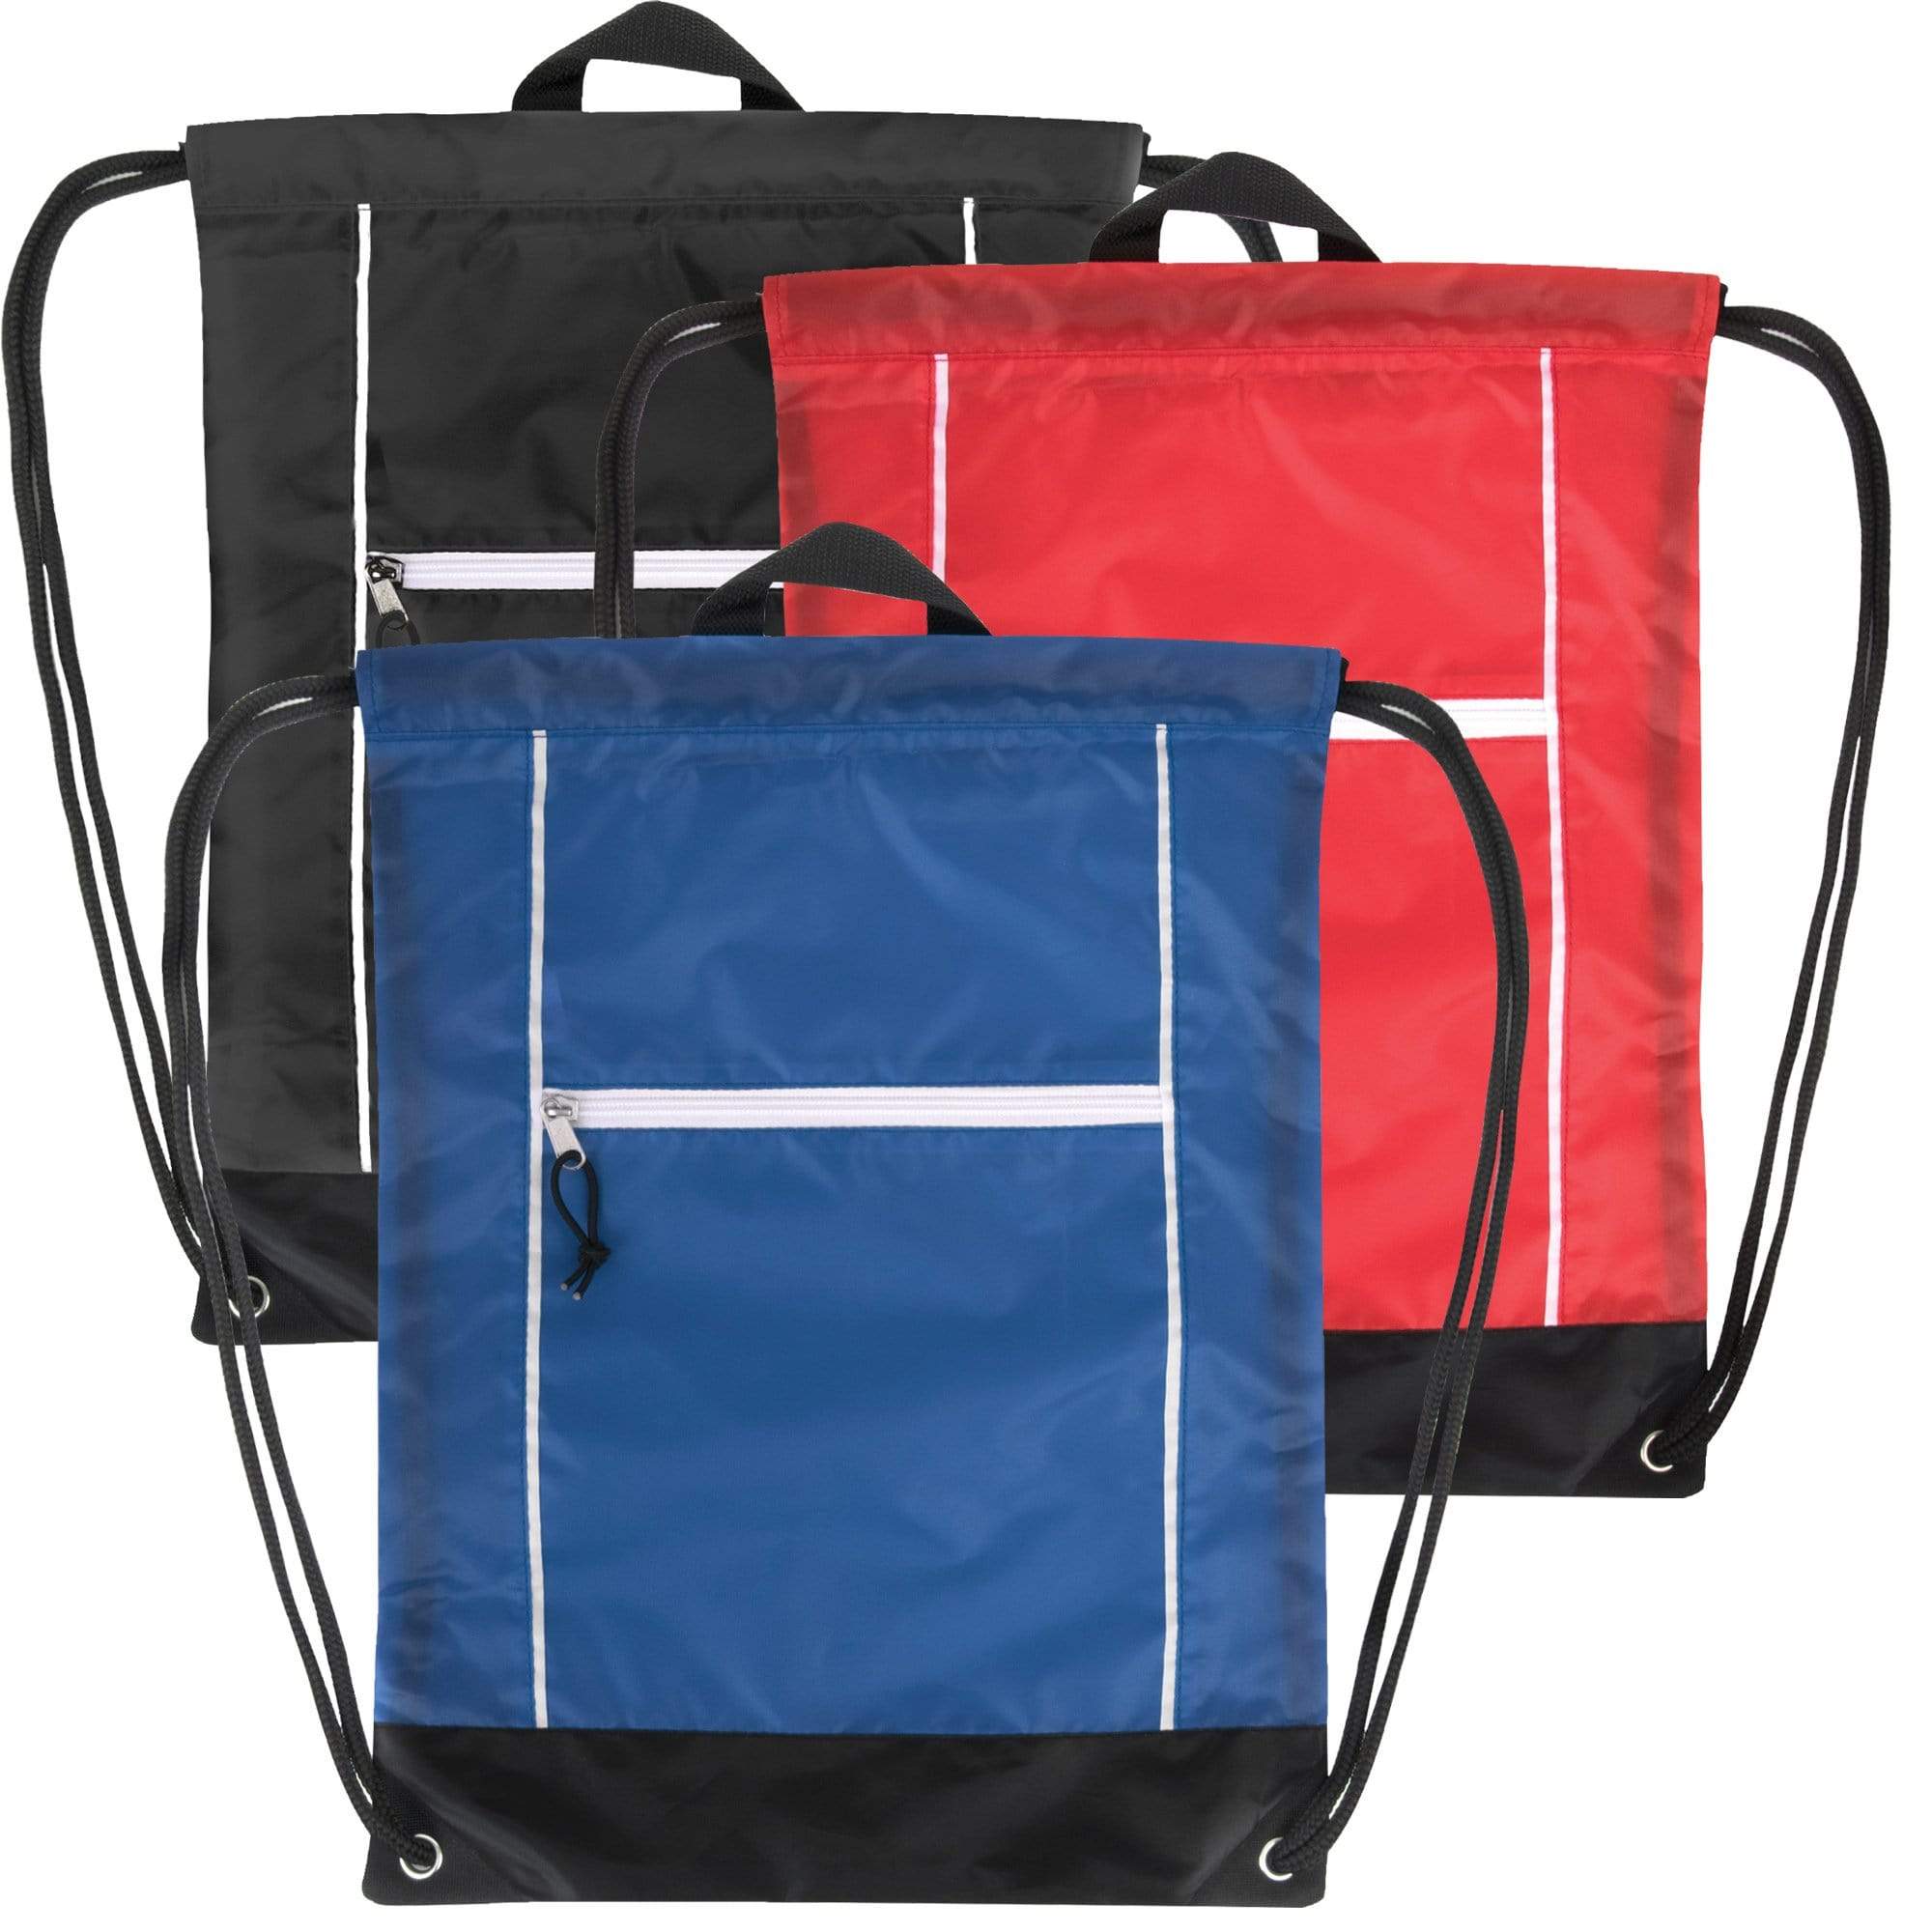 Wholesale 18 Inch Front Zippered Drawstring Bag - 3 Color Assortment